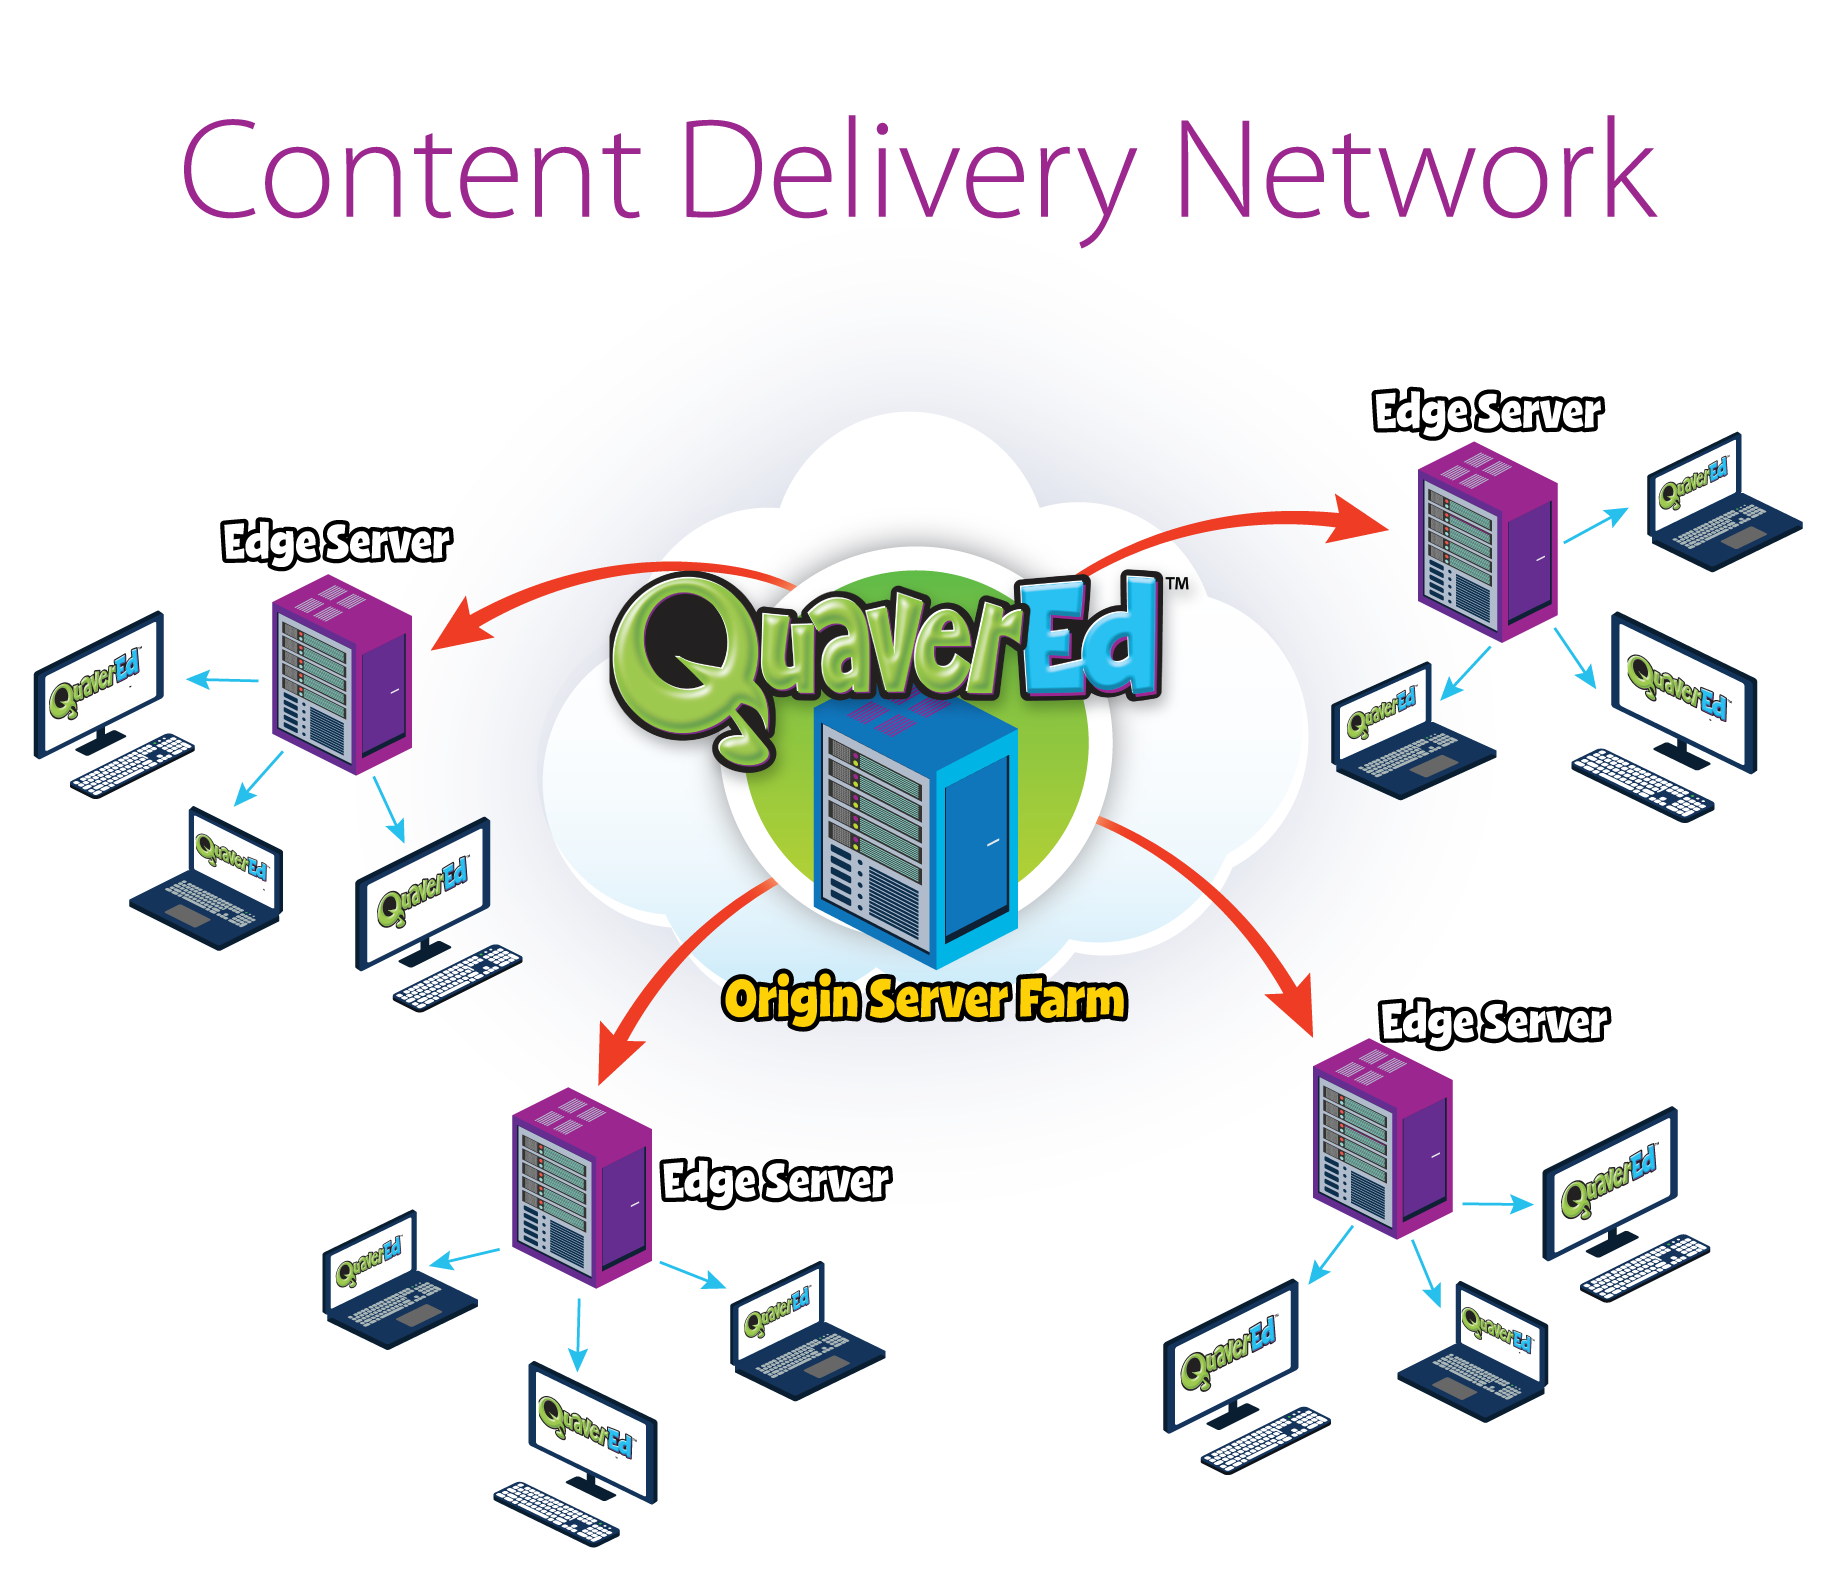 Quaver's Content Delivery Network. At the center is Quaver's Origin Server Farm, and from there data travels to multiple Edge Servers before being delivered to Quaver's Customers.